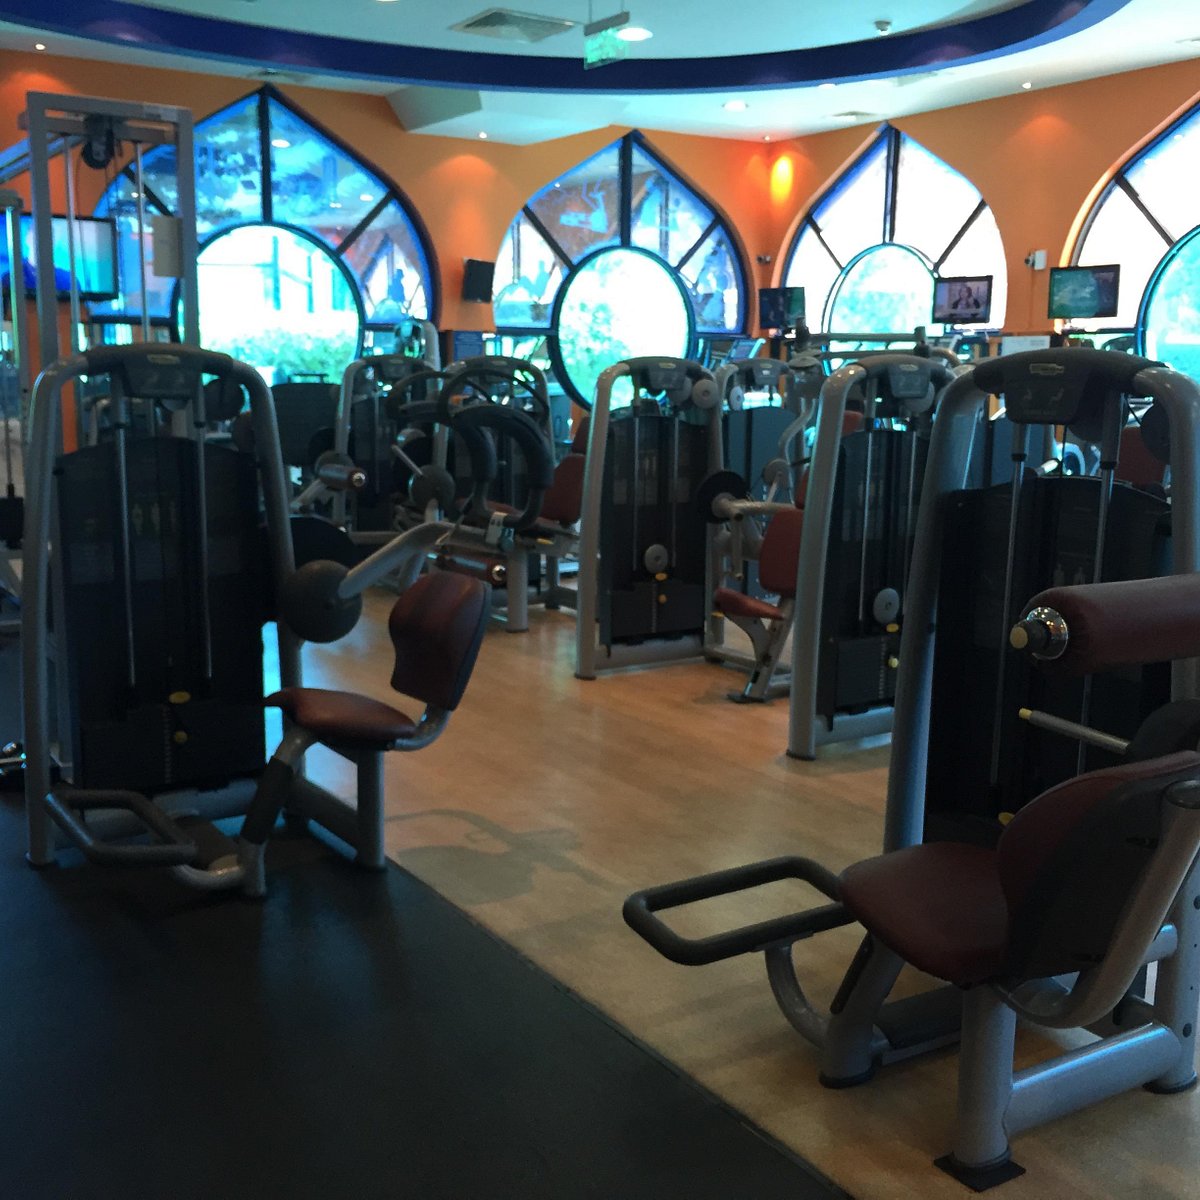 Eden Spa Health Club Abu Dhabi All You Need To Know Before You Go